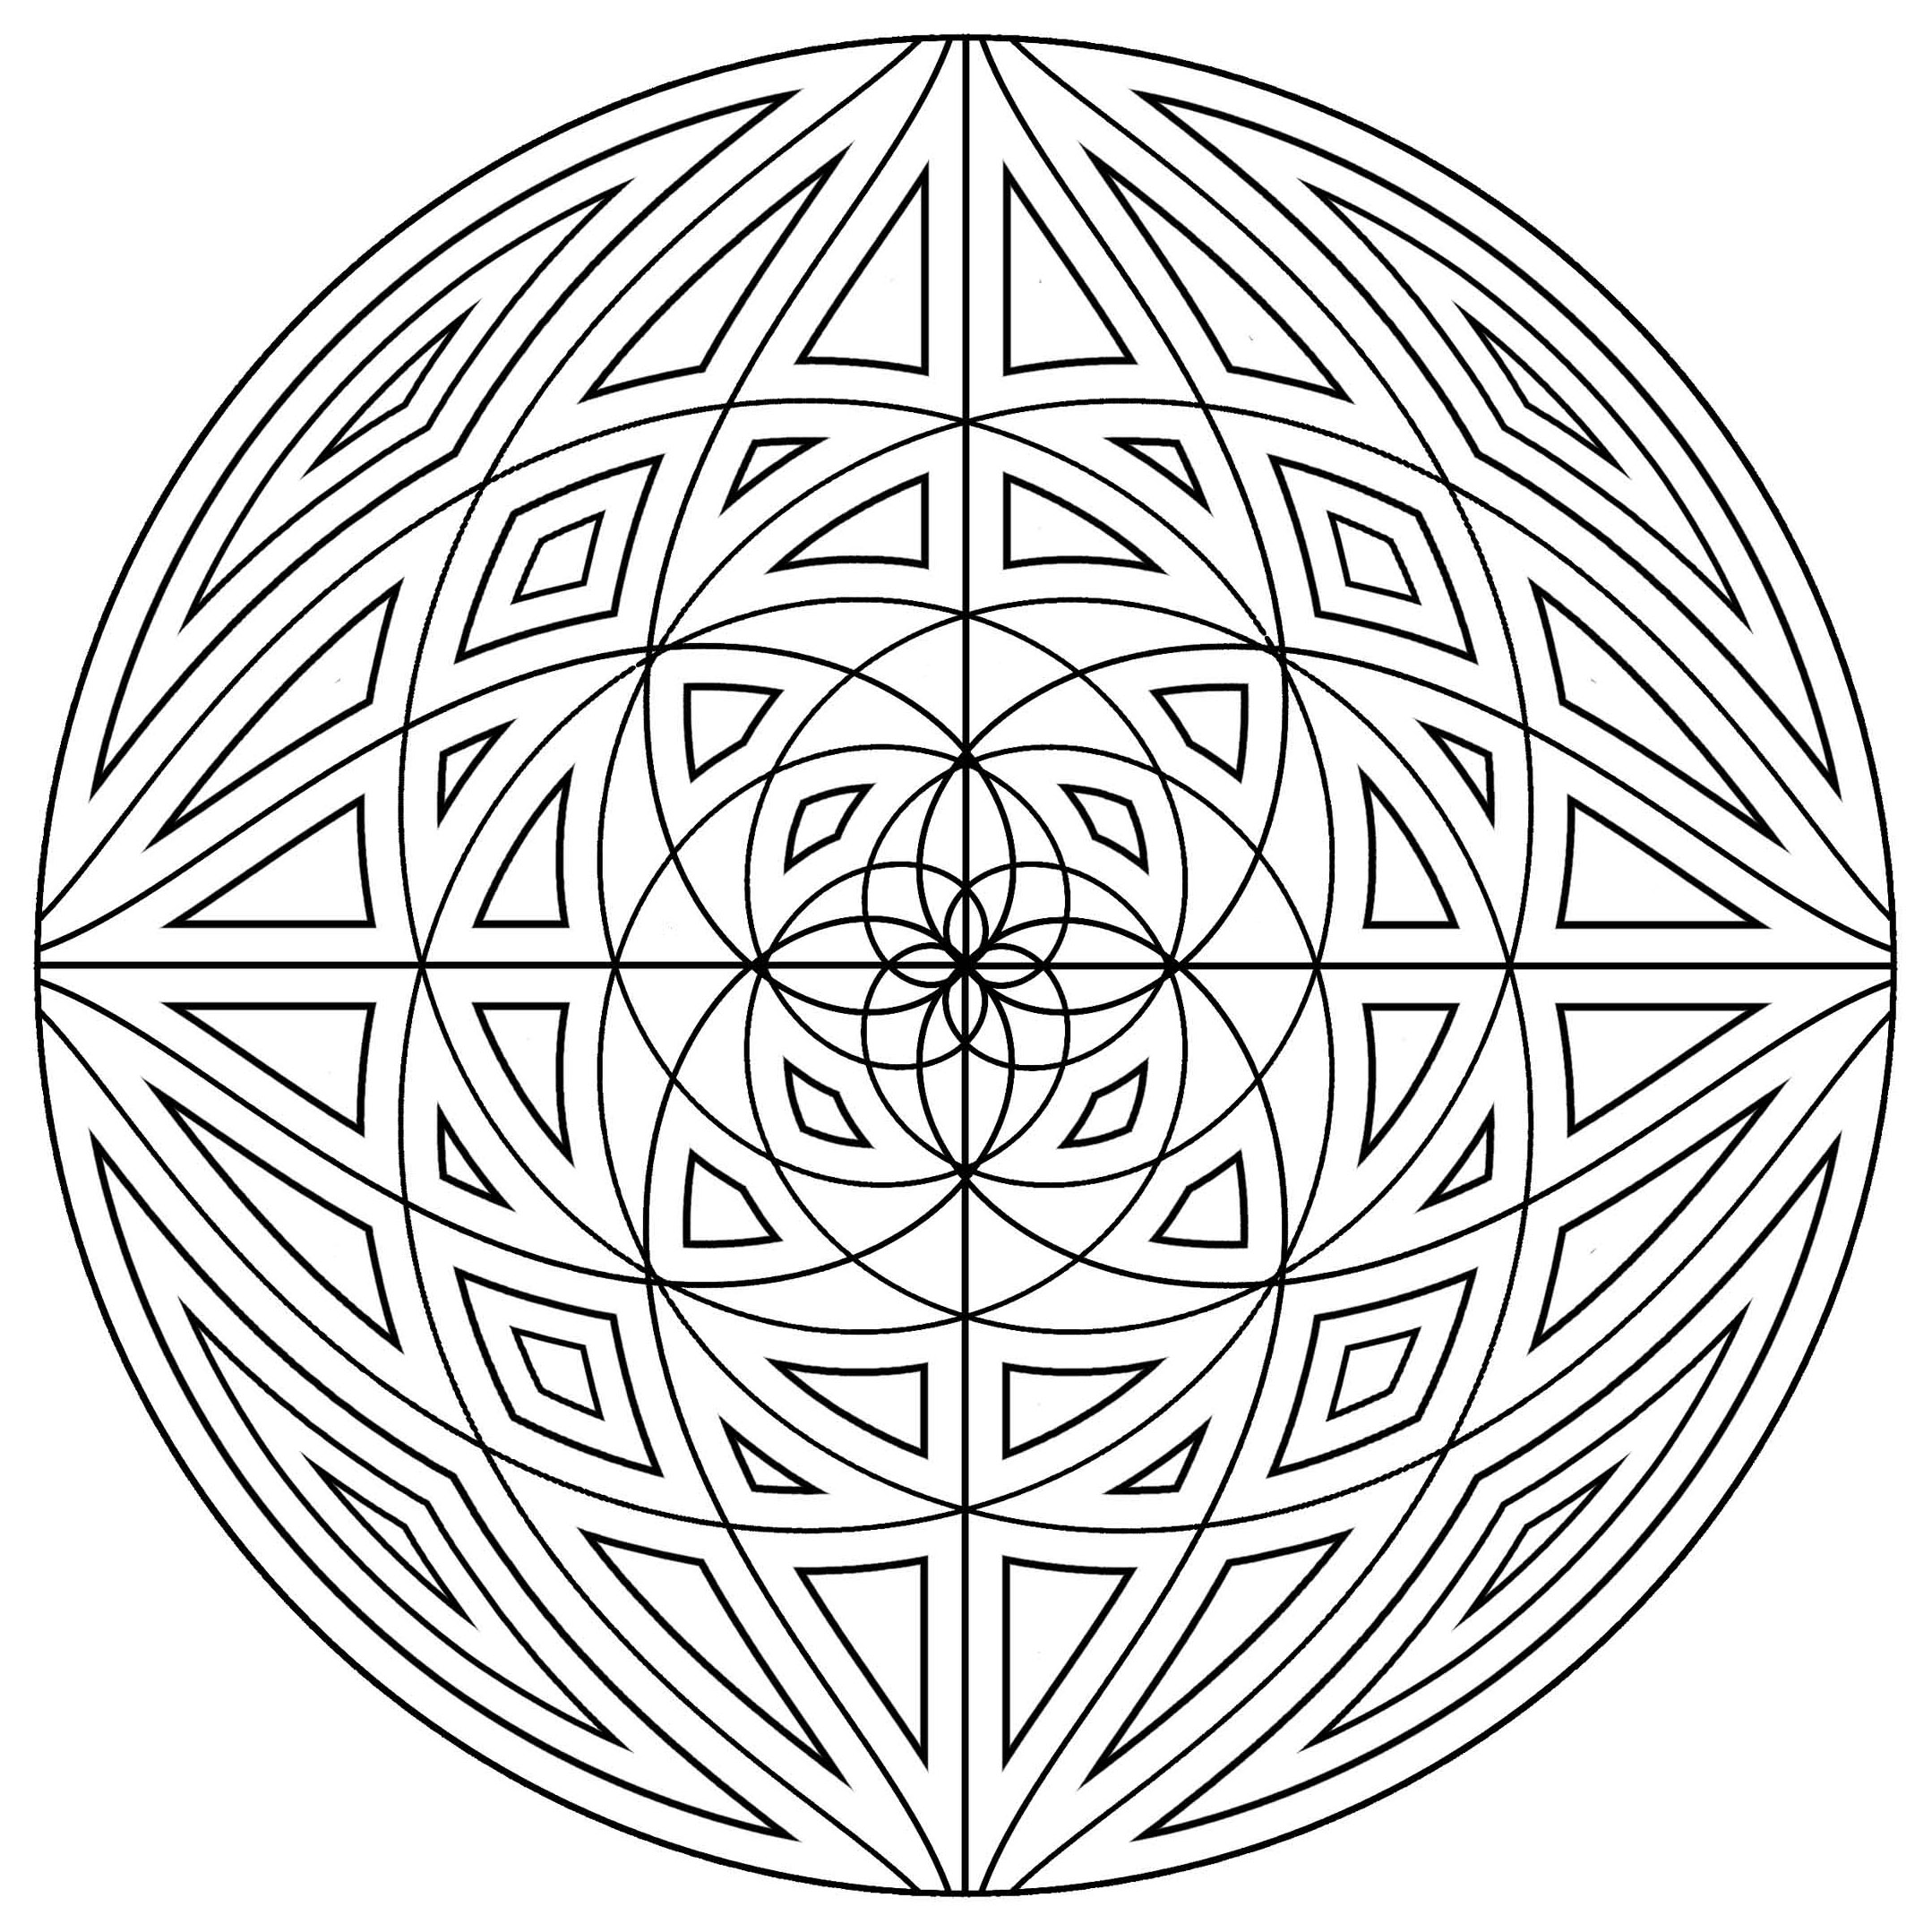 Mandala with concentric lines